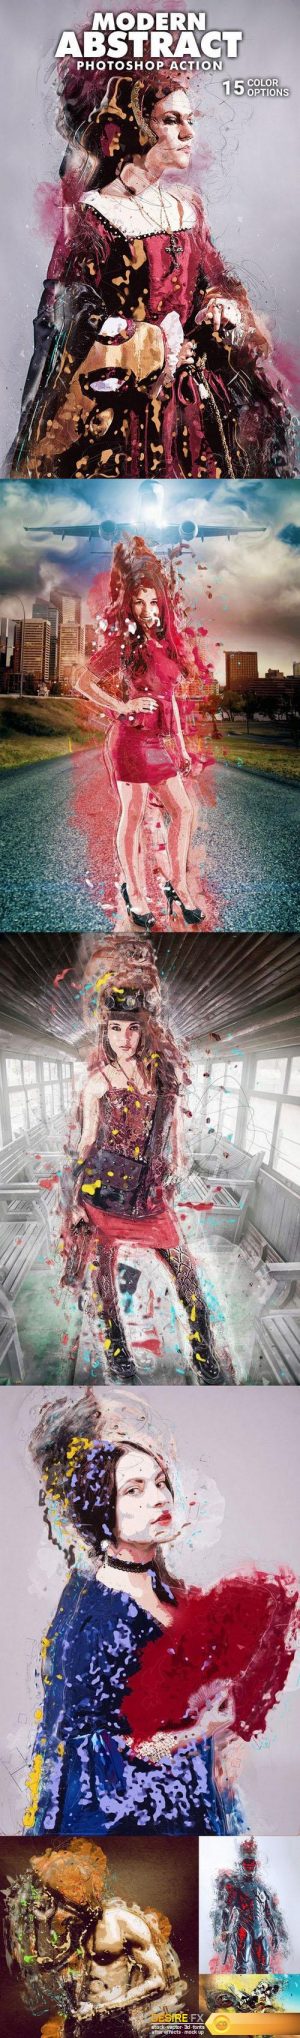 Graphicriver 19963077 – modern abstract photoshop action